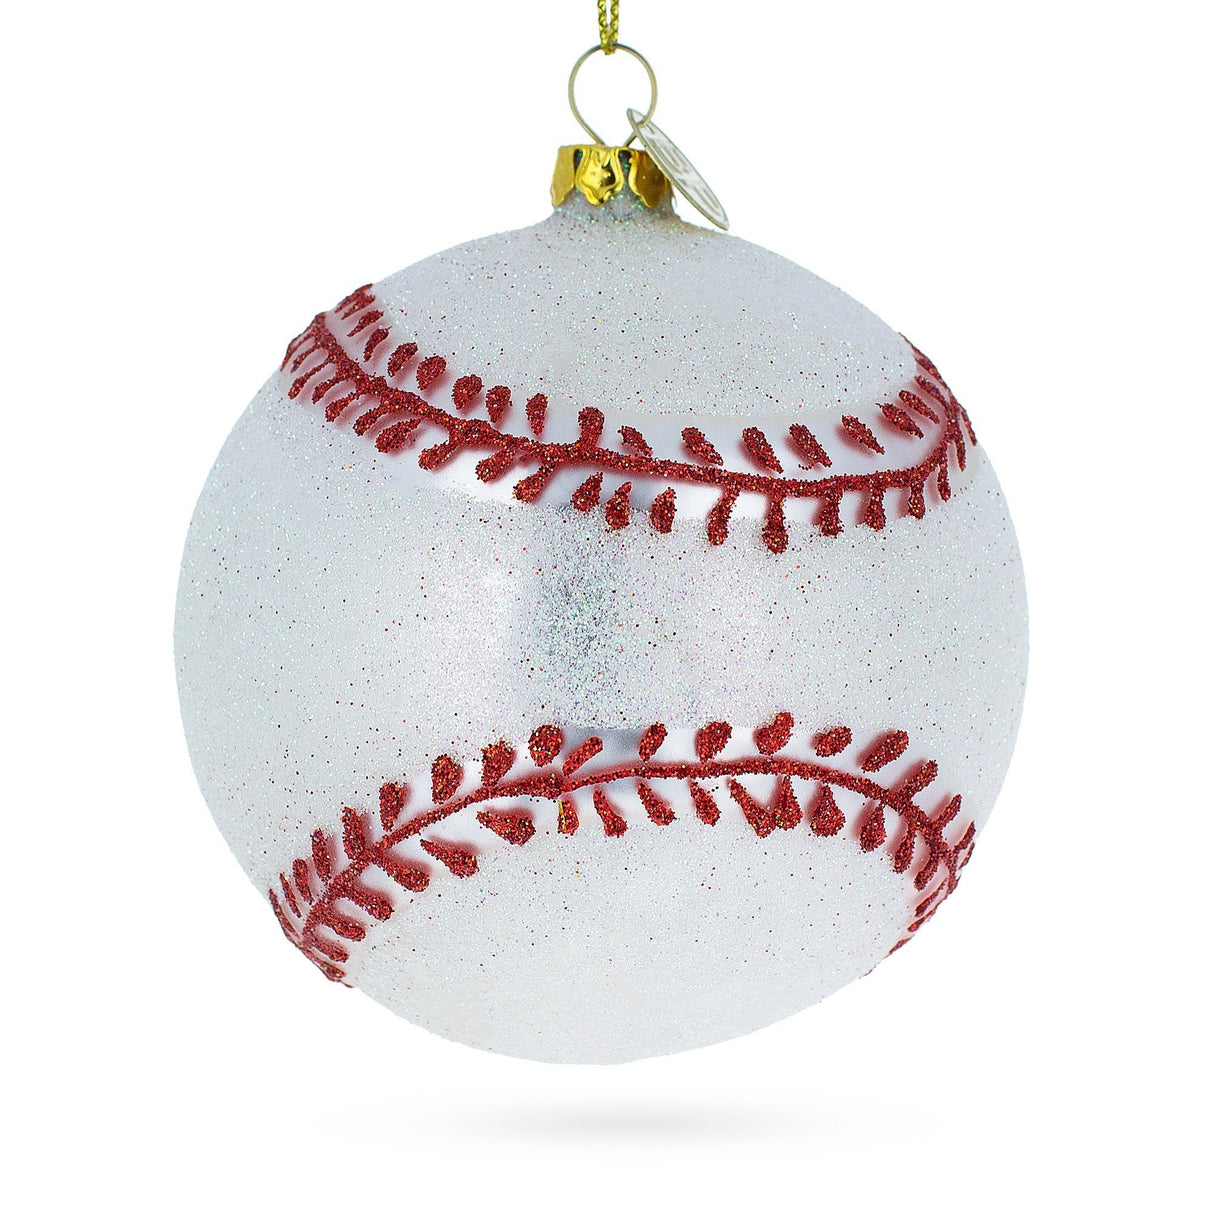 Home-Run Baseball - Blown Glass Christmas Ornament in White color, Round shape